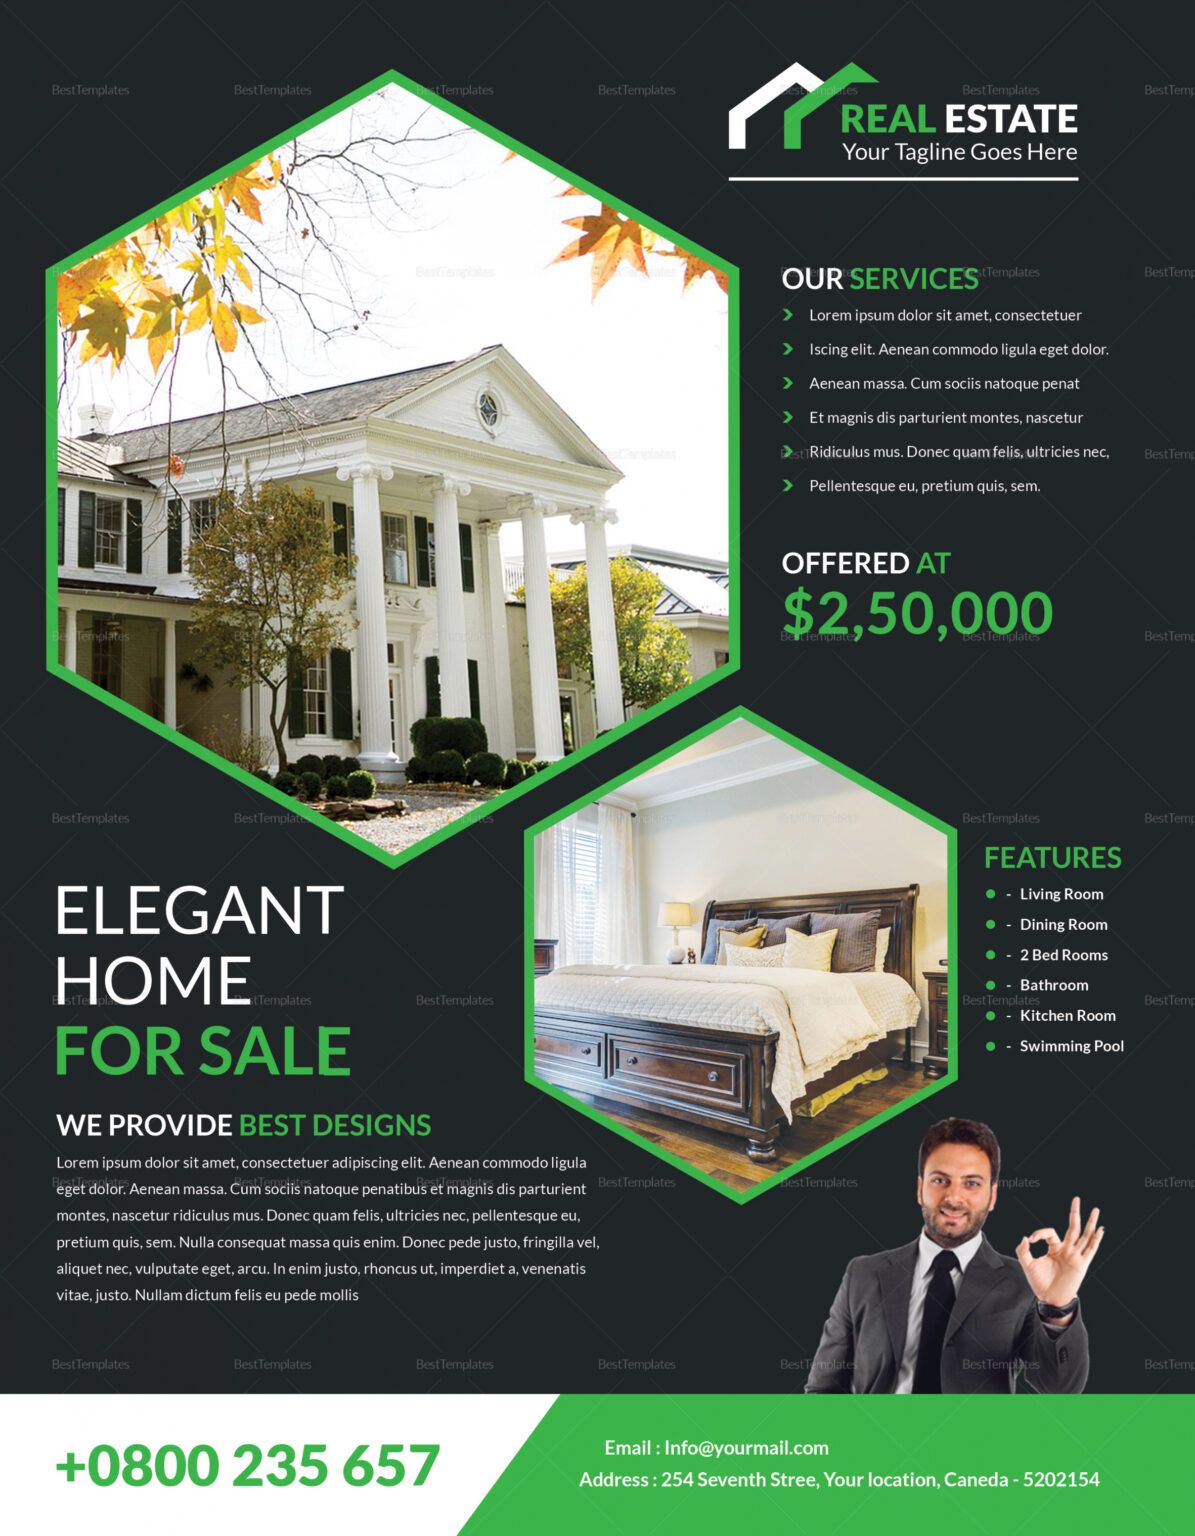 Free Real Estate Listing Flyer Template | Dremelmicro